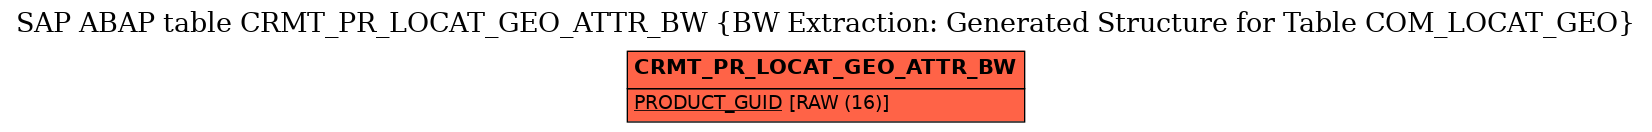 E-R Diagram for table CRMT_PR_LOCAT_GEO_ATTR_BW (BW Extraction: Generated Structure for Table COM_LOCAT_GEO)